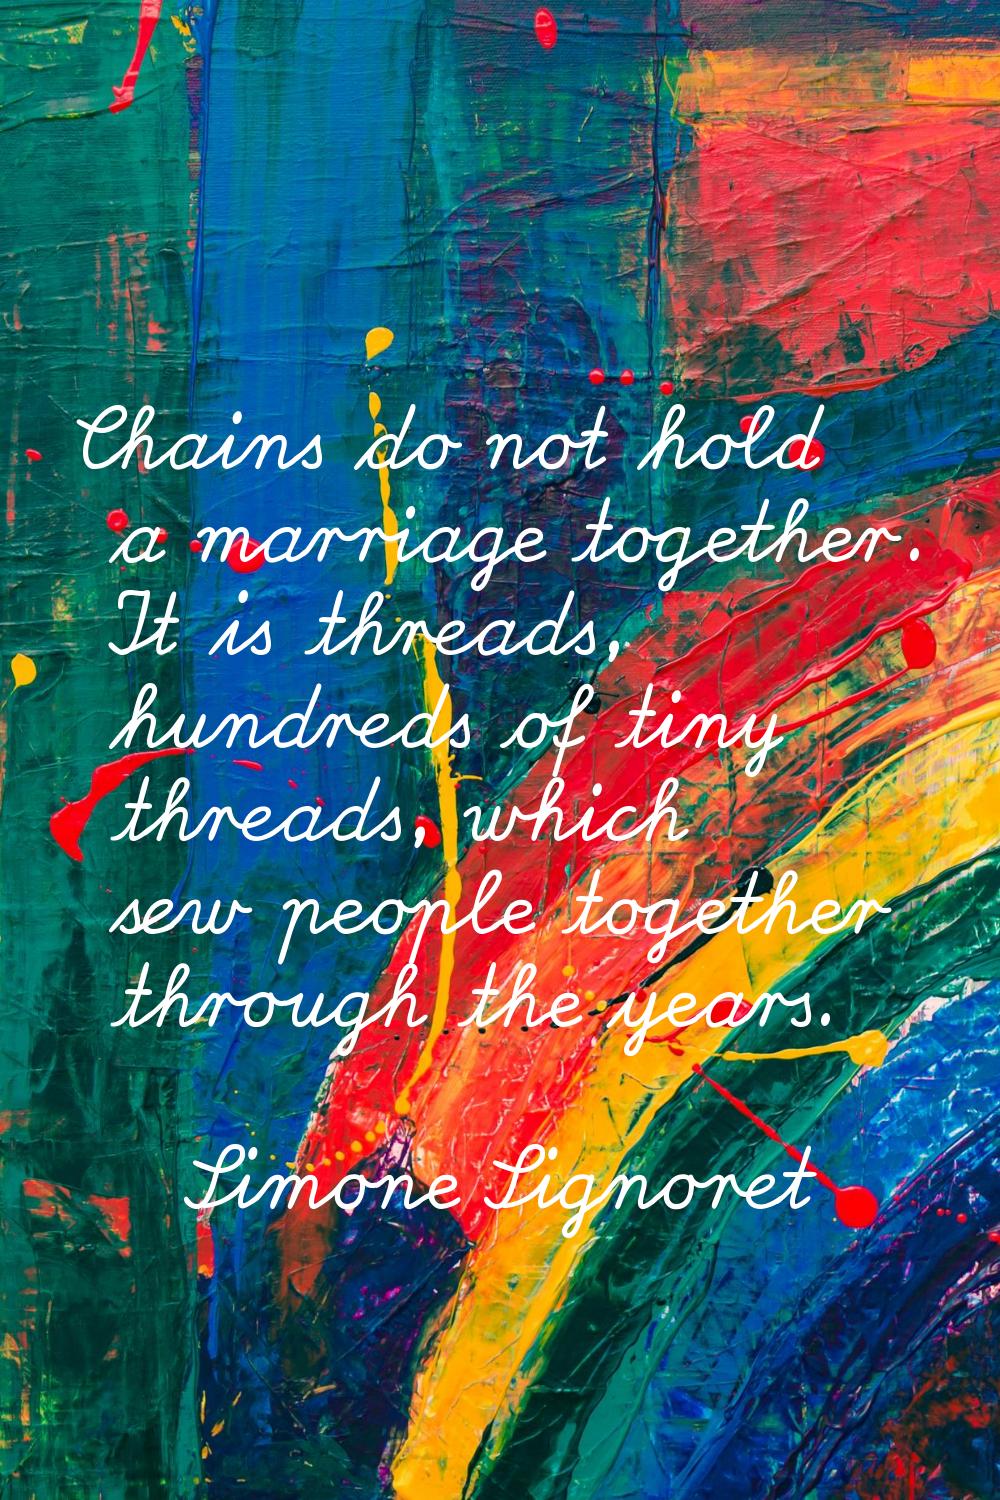 Chains do not hold a marriage together. It is threads, hundreds of tiny threads, which sew people t